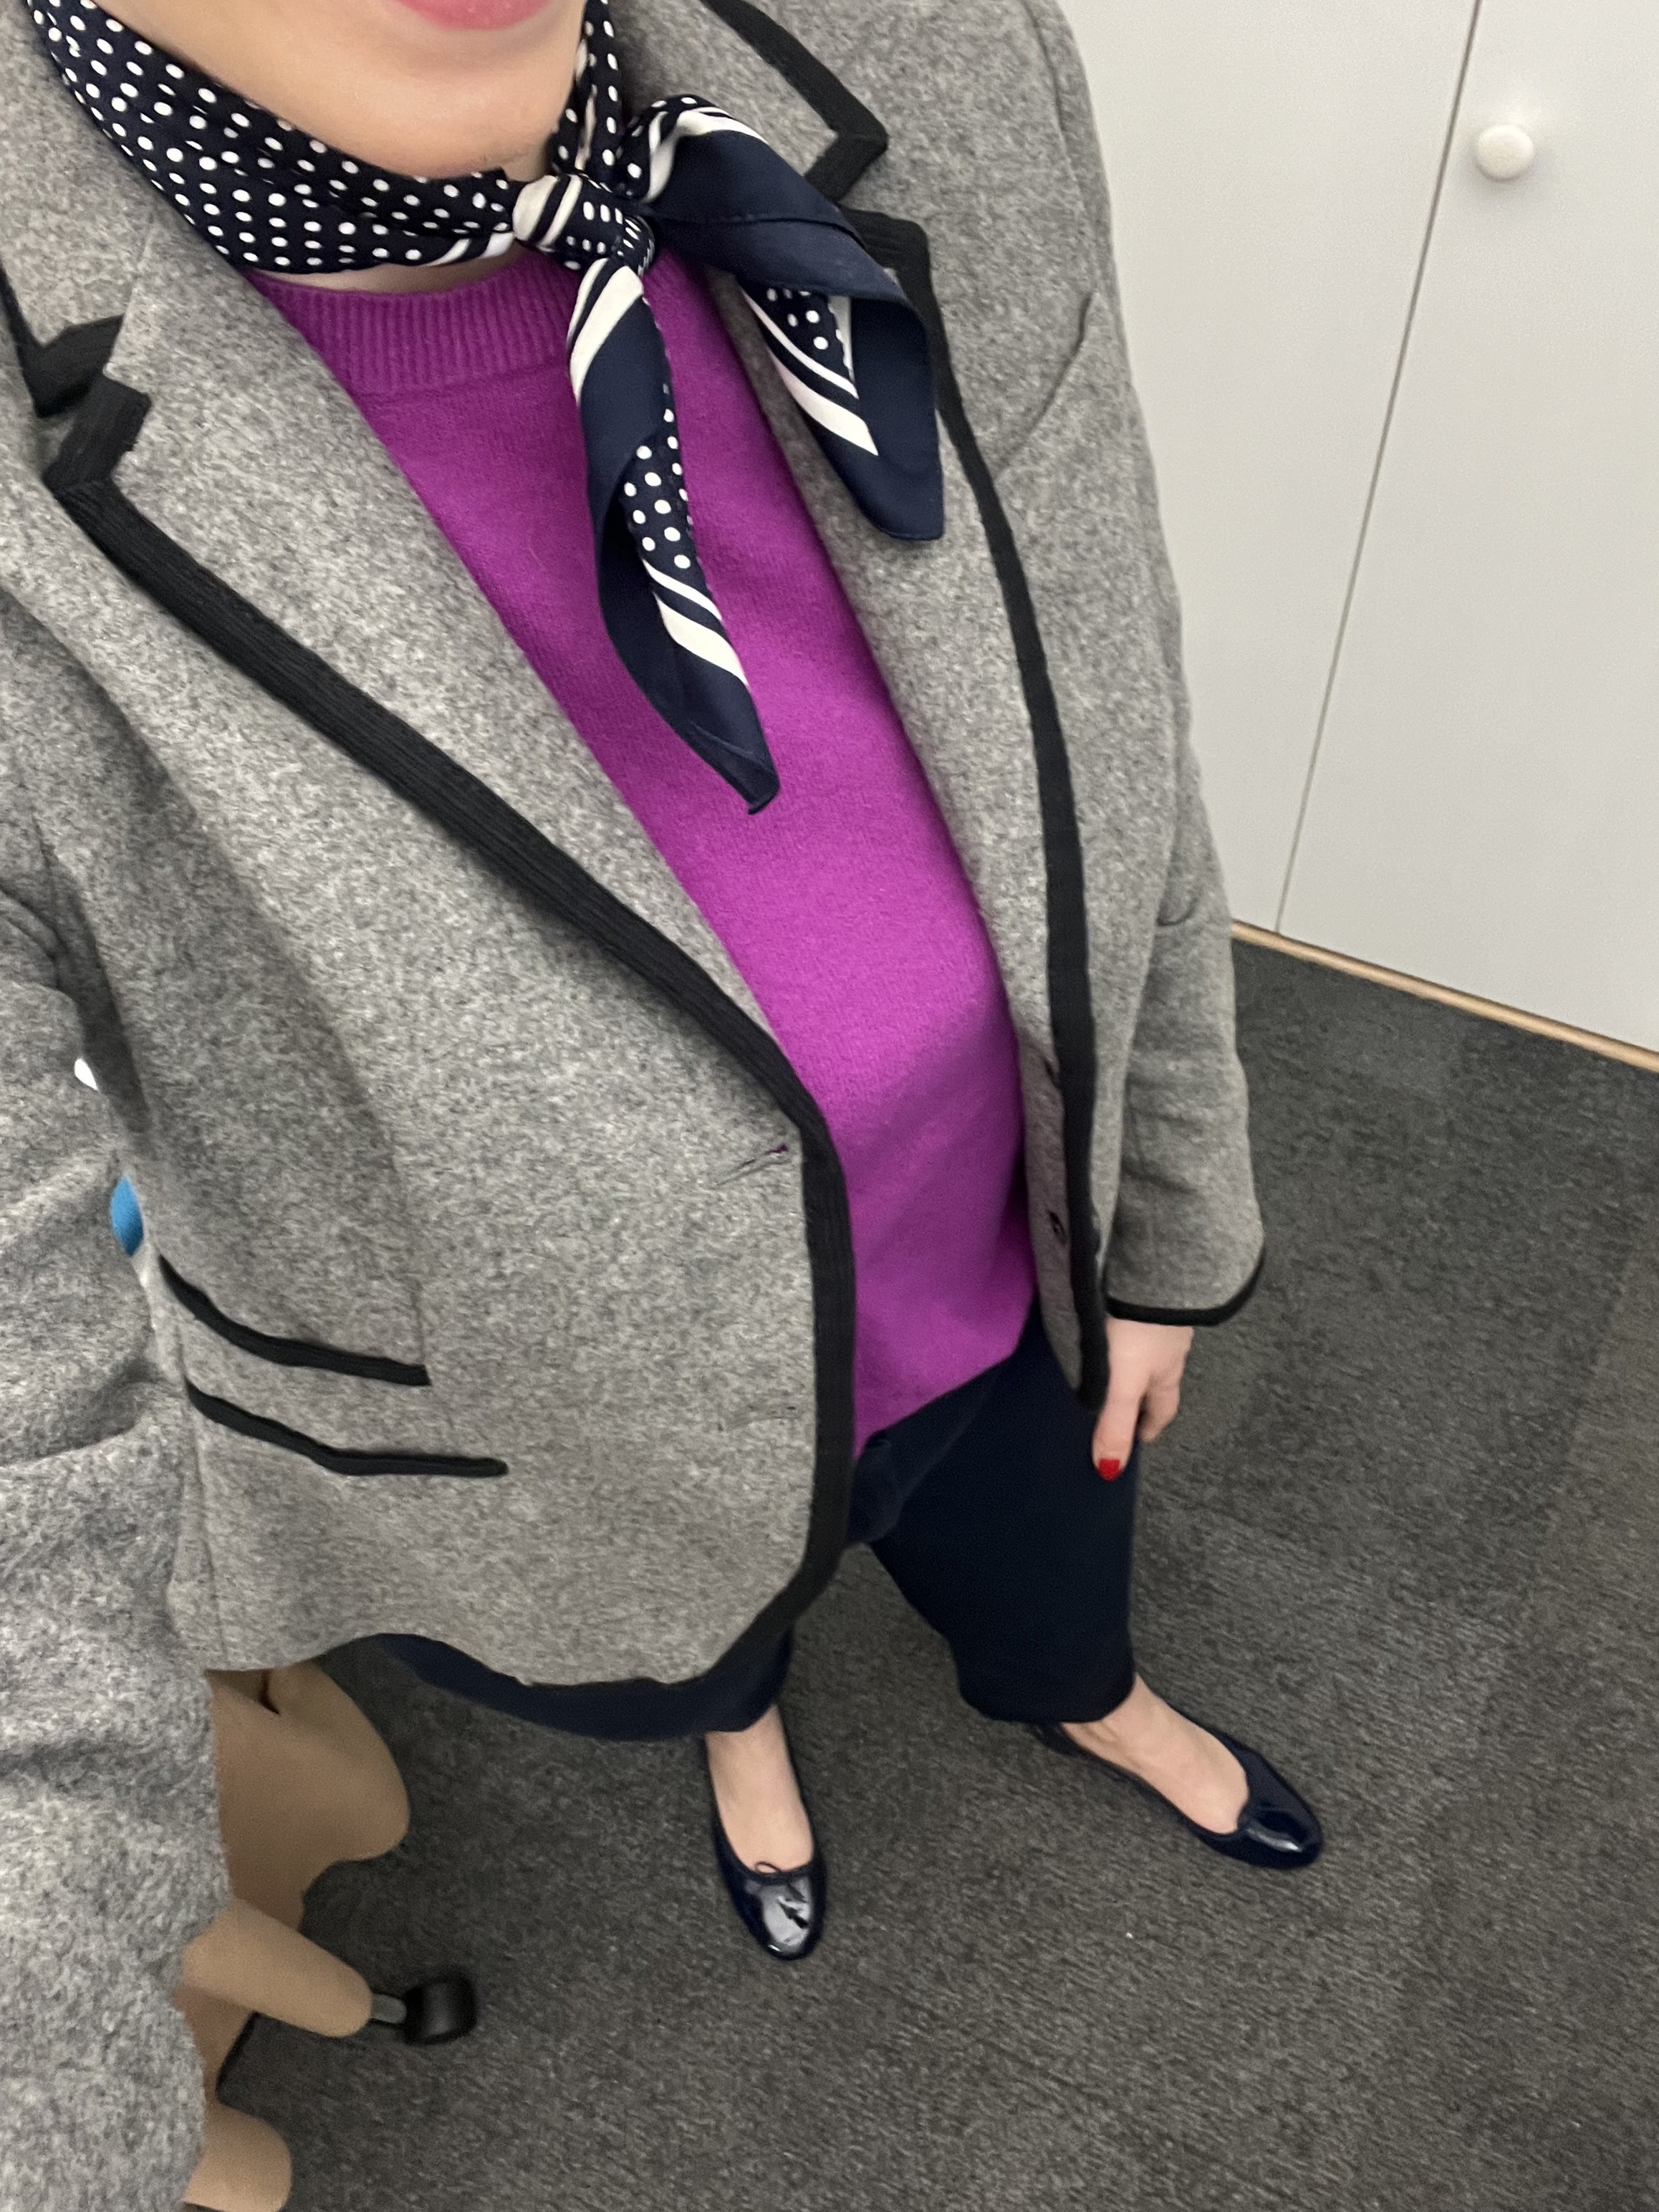 silk scarf, purple sweater, workwear, winter workwear, office style, office outfit, preppy outfit, preppy winter outfit, office style, winter workwear, office outfit, suiting, law firm